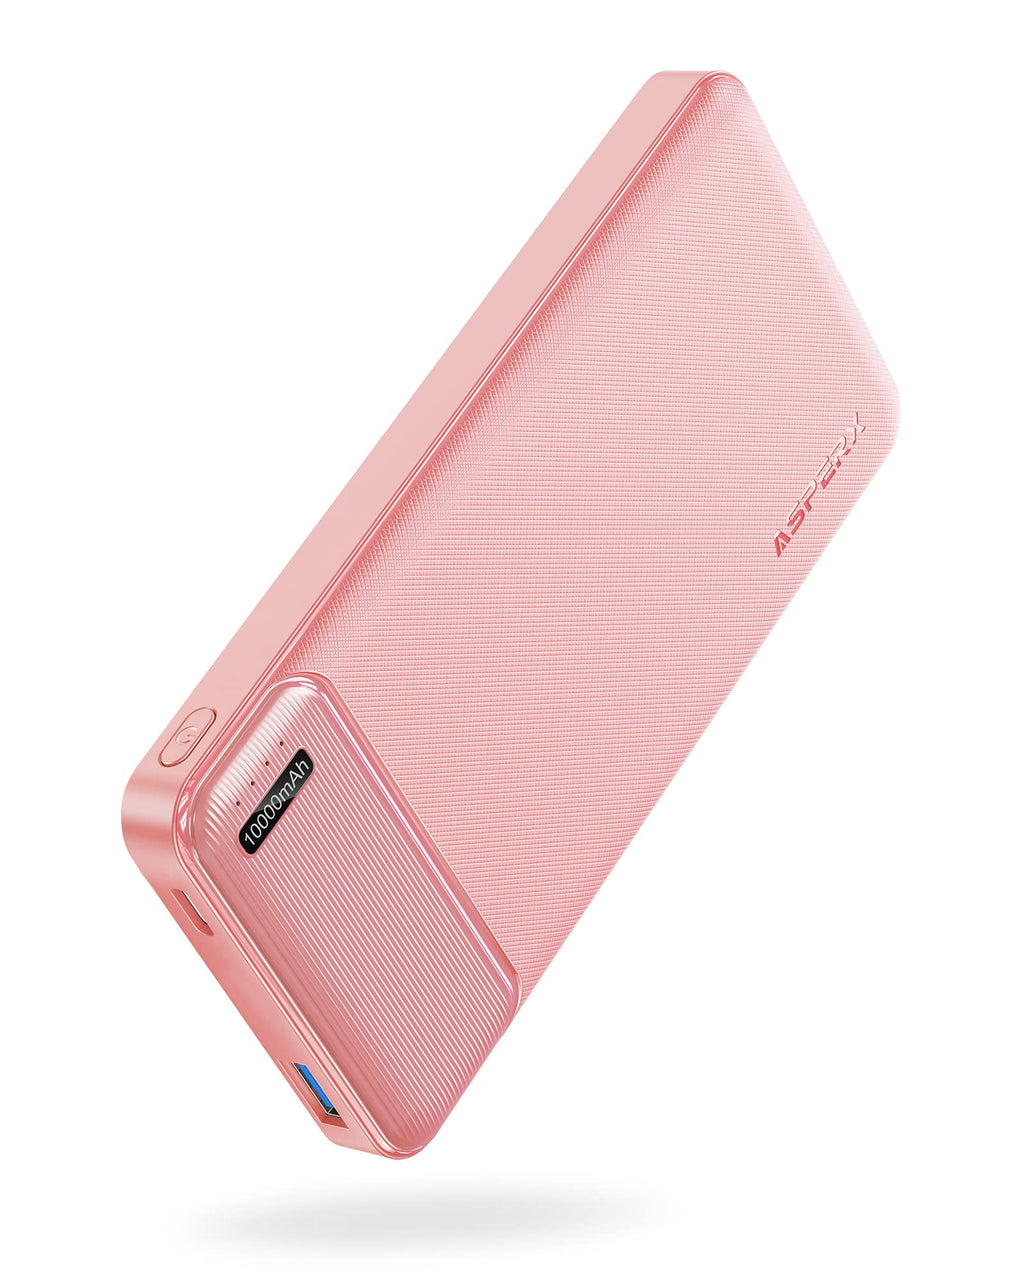  [AUSTRALIA] - AsperX 22.5W 10000mAh Portable Charger USB C Output Power Bank Fast Charging, External Battery Pack Portable Phone Charger for iPhone, Samsung, Android and More Pink